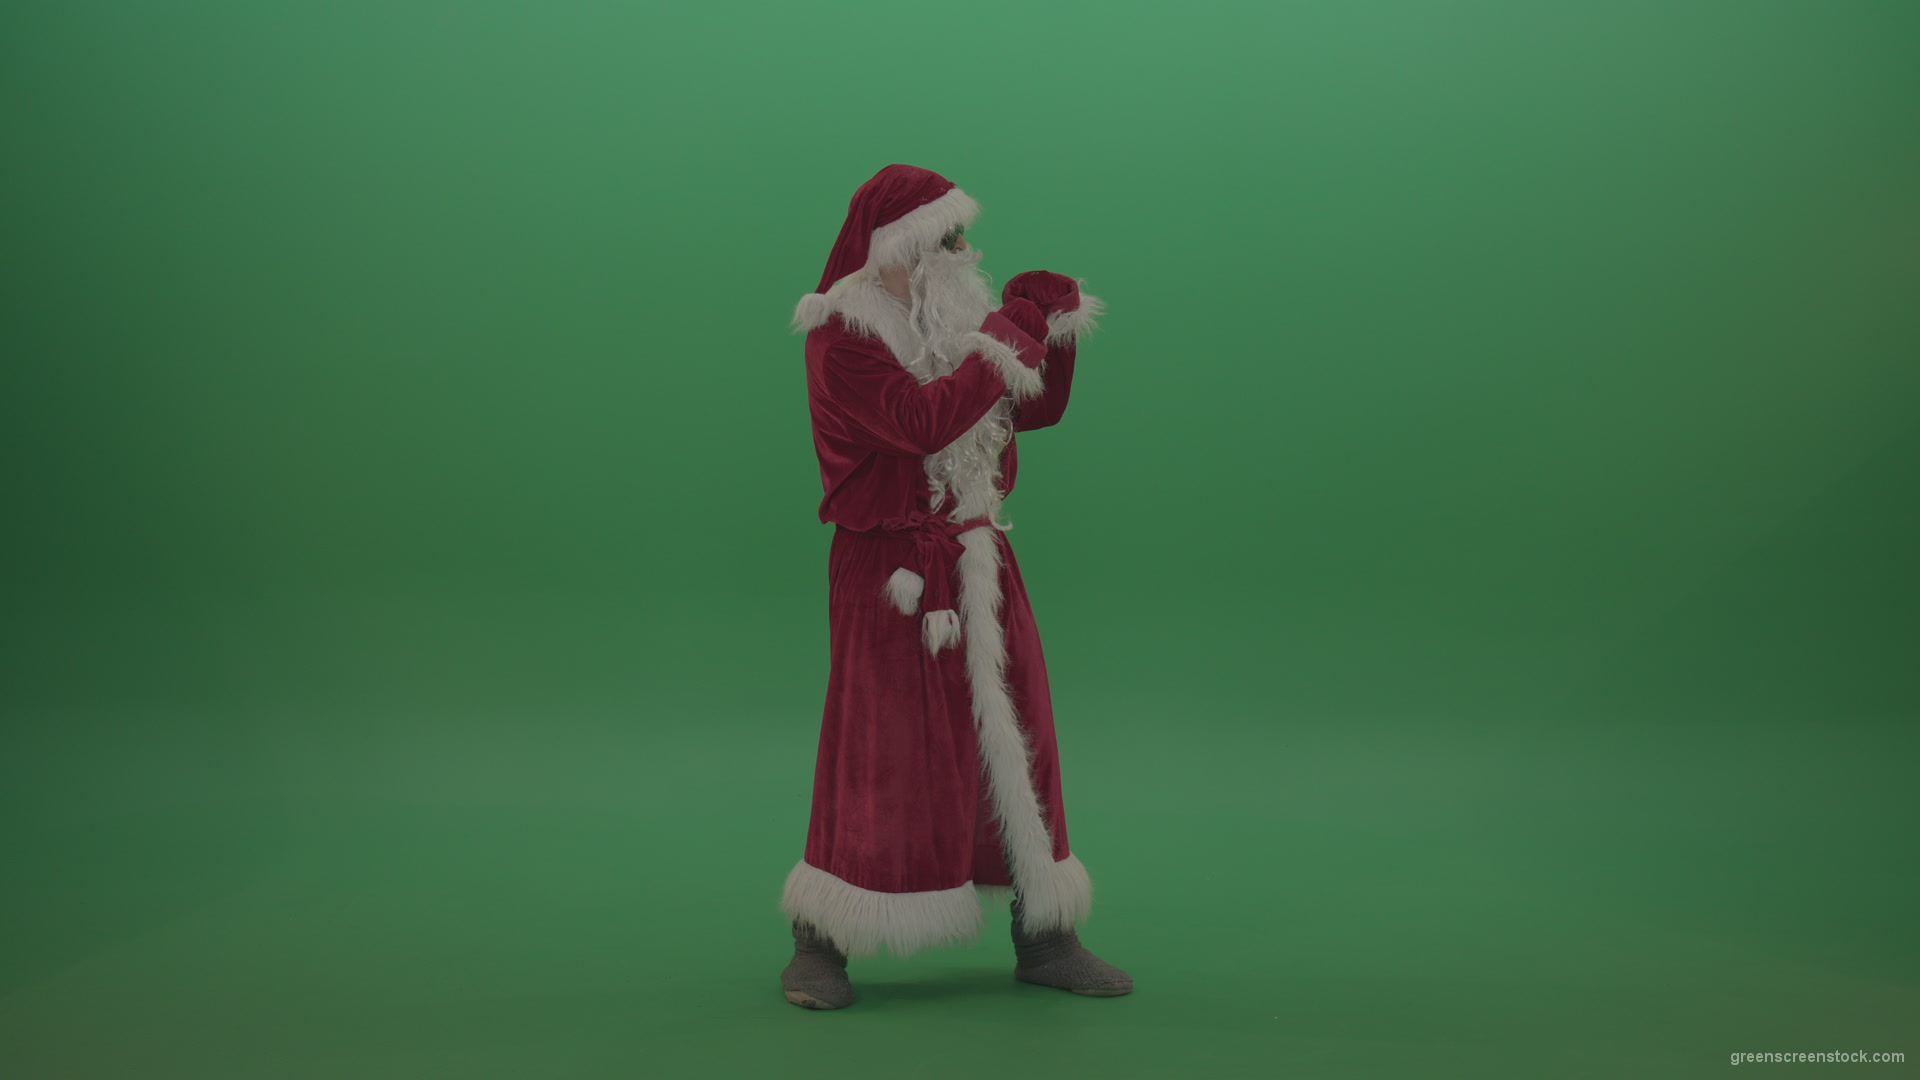 Santa-in-black-glasses-show-cases-his-boxing-skills-over-chromakey-background_001 Green Screen Stock